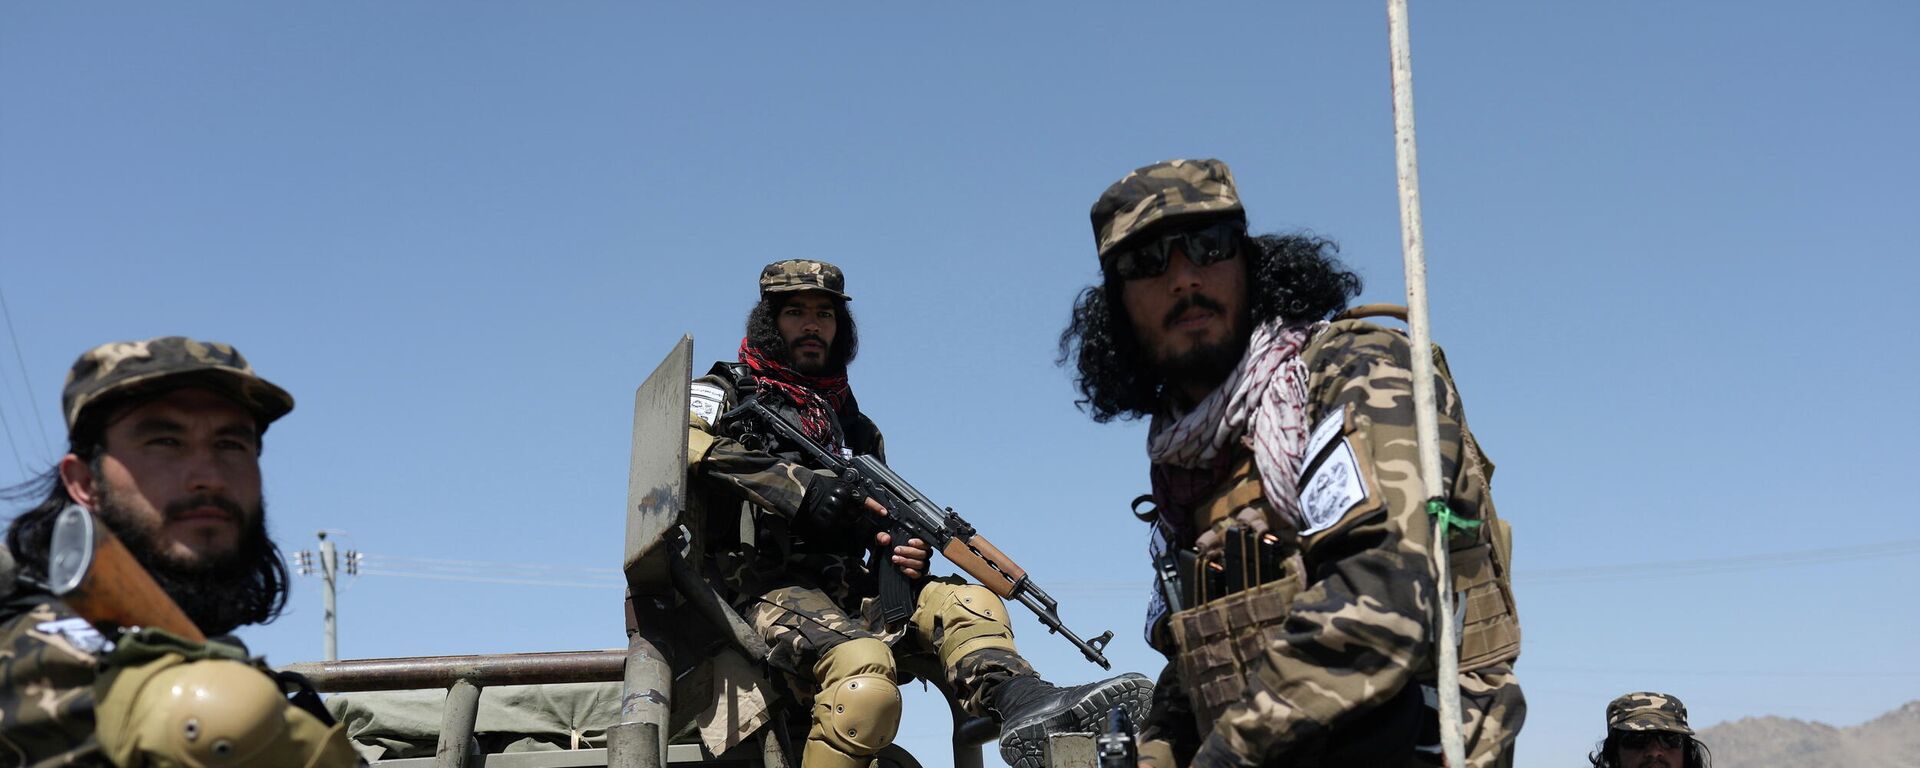 Members of the Taliban Intelligence Special Forces guard the military airfield in Kabul - Sputnik International, 1920, 13.09.2021